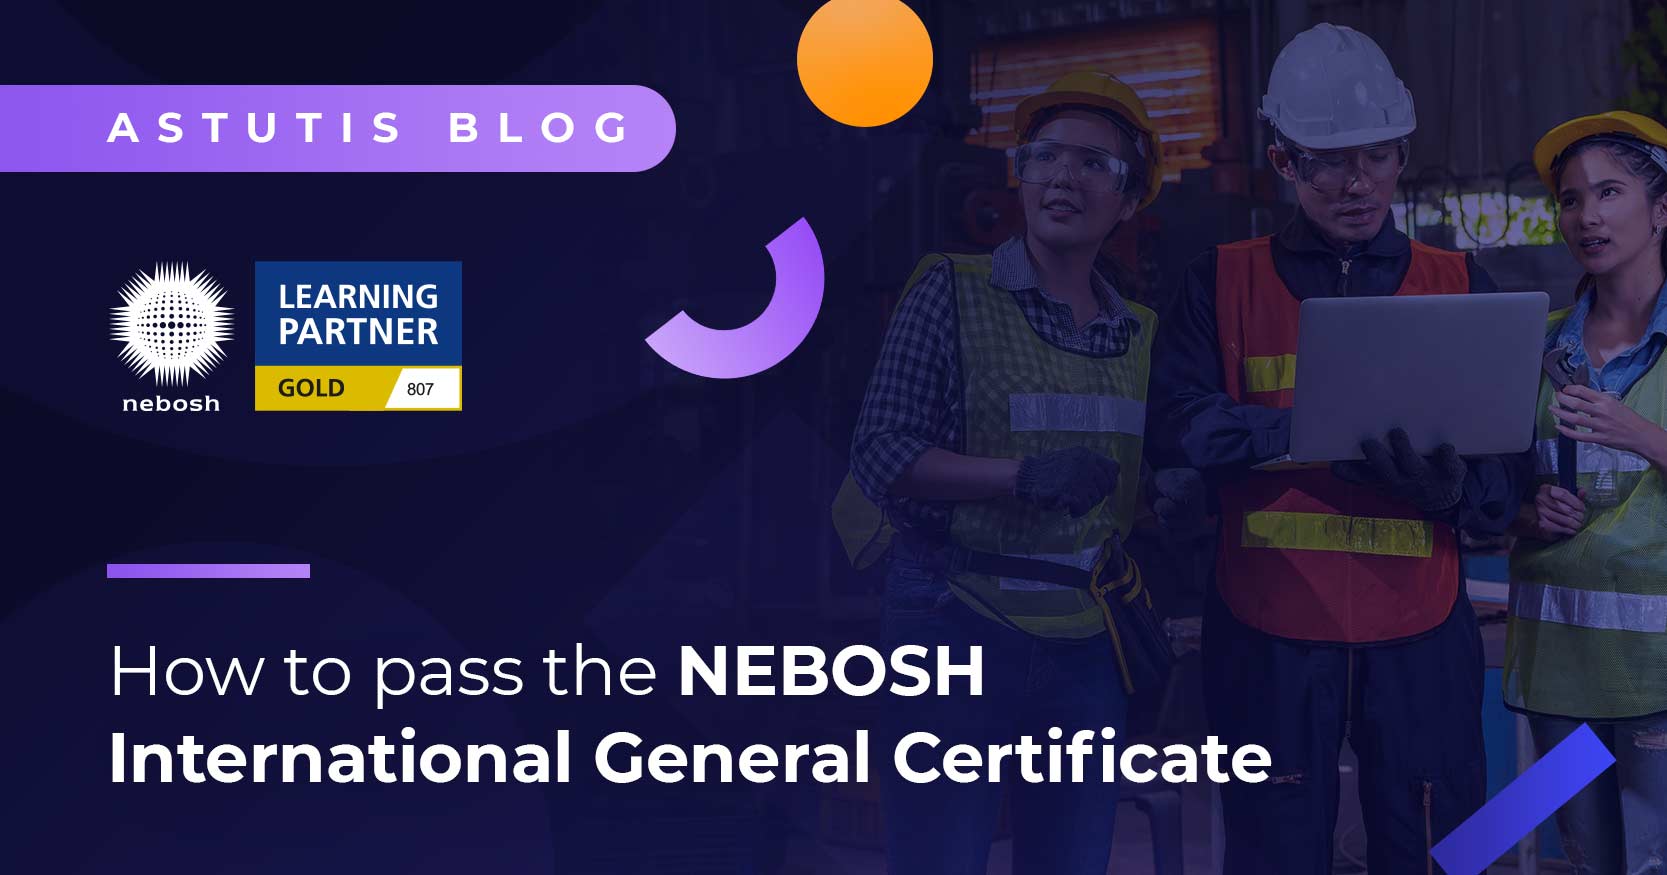 The Astutis Guide: How to pass the NEBOSH International General Certificate Image